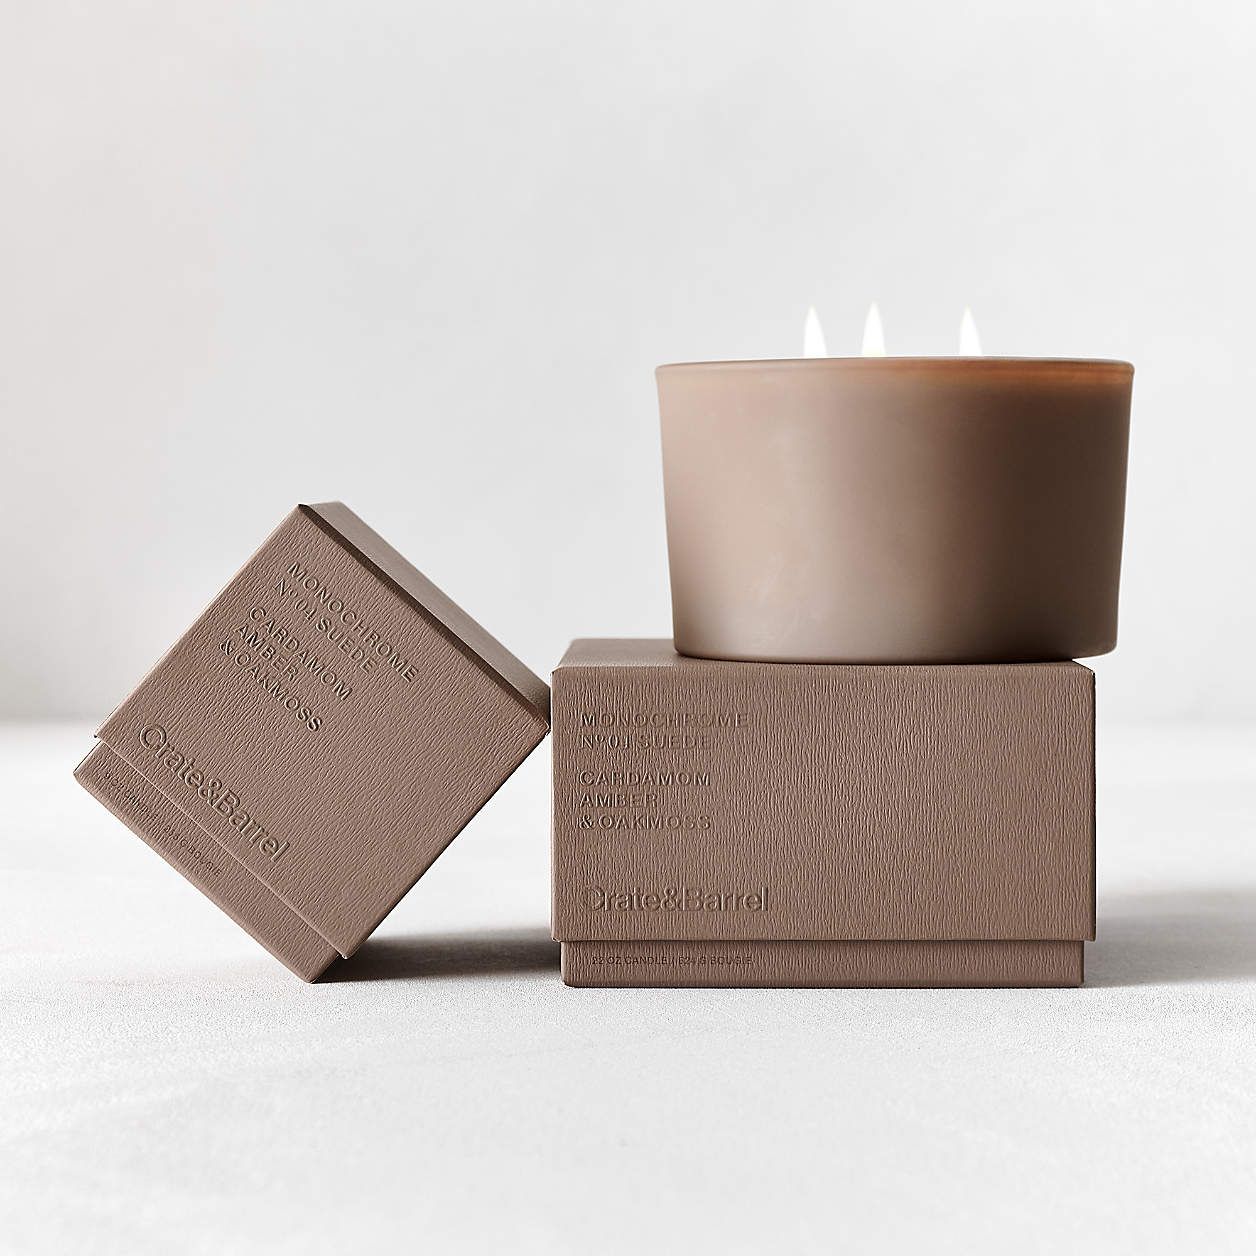 Monochrome No. 4 Suede 3-Wick Scented Candle - Cardamom, Amber and Oakmoss + Reviews | Crate & Ba... | Crate & Barrel